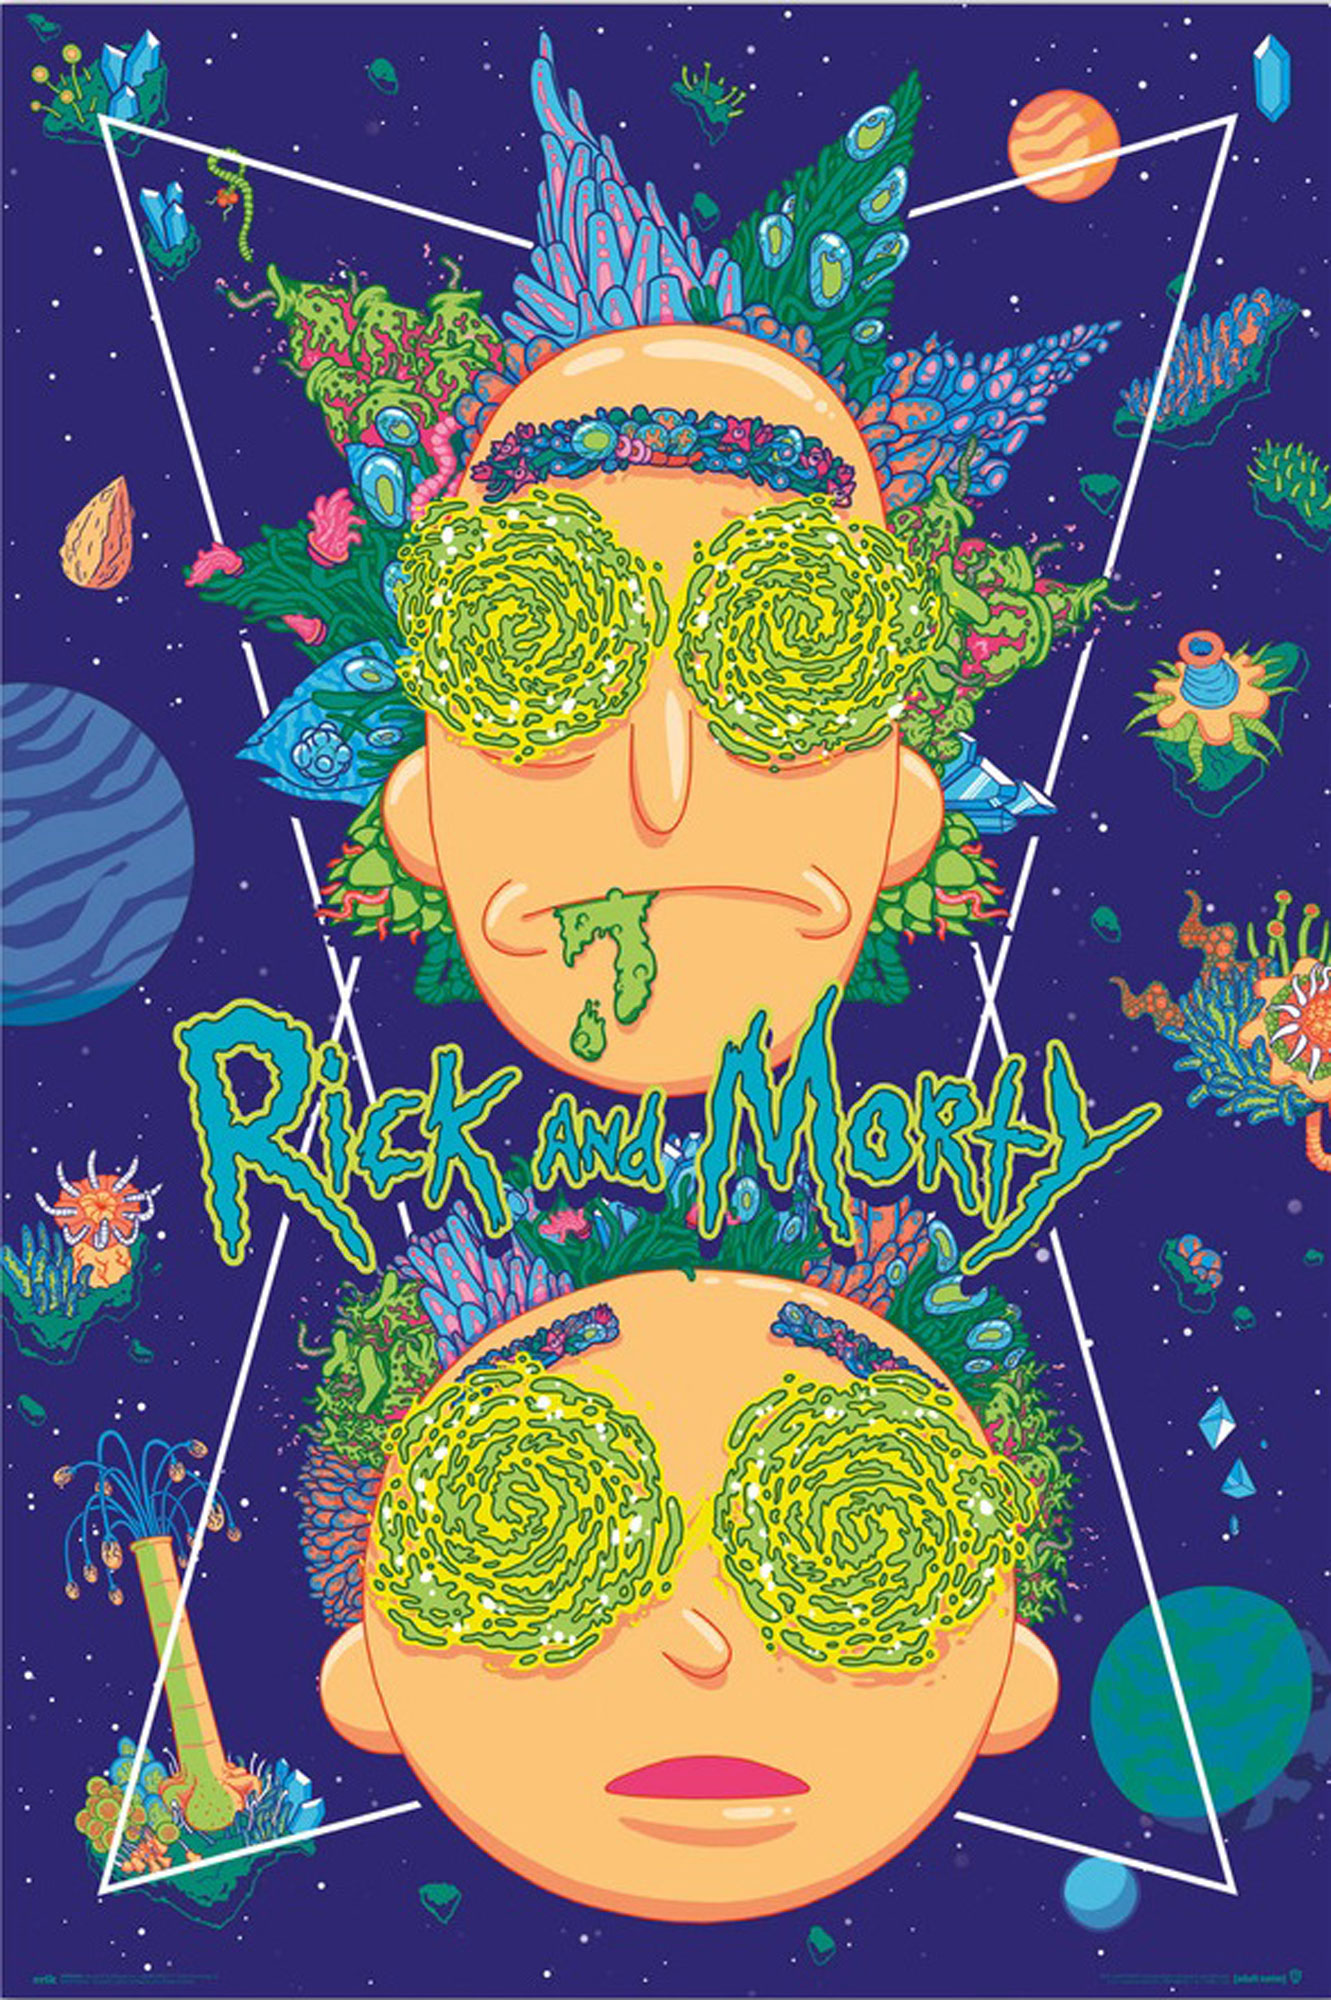 Morty the in Sky & Rick High -